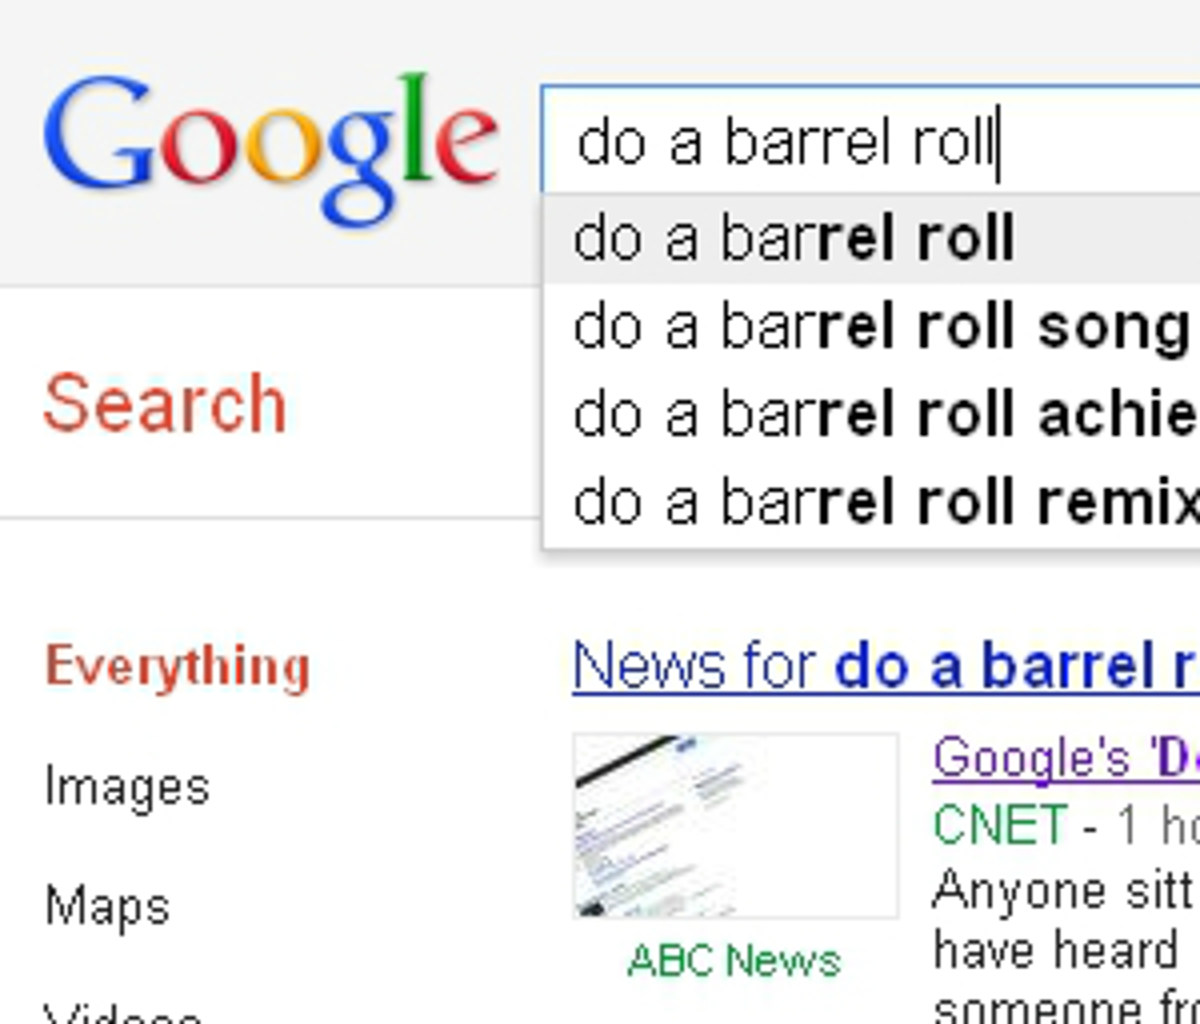 How to “Do a Barrel Roll” on Google 